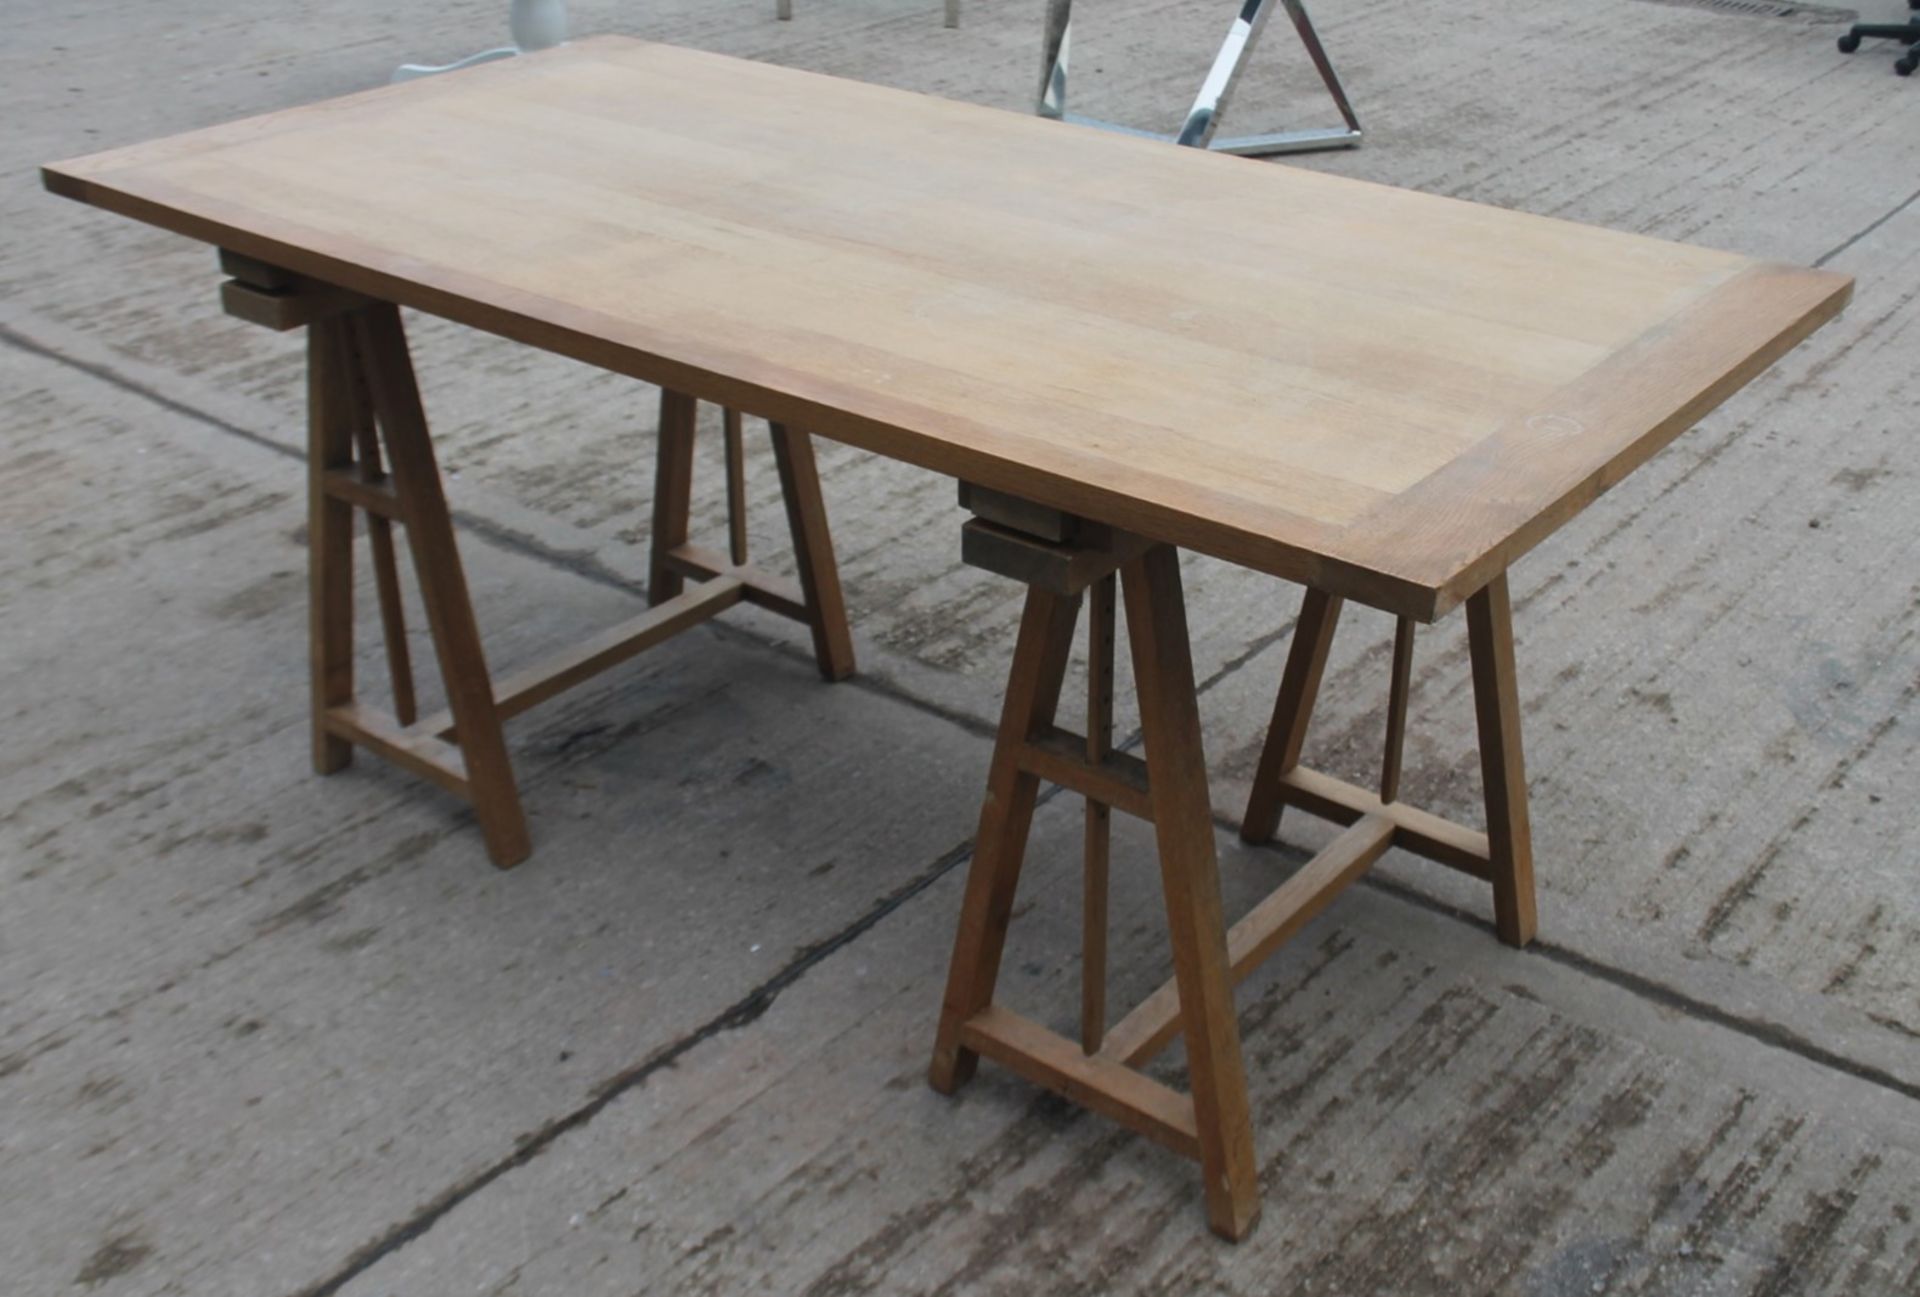 1 x Solid Wood Trestle Dining Table - Recently Relocated From An Exclusive Property - RRP £750.00